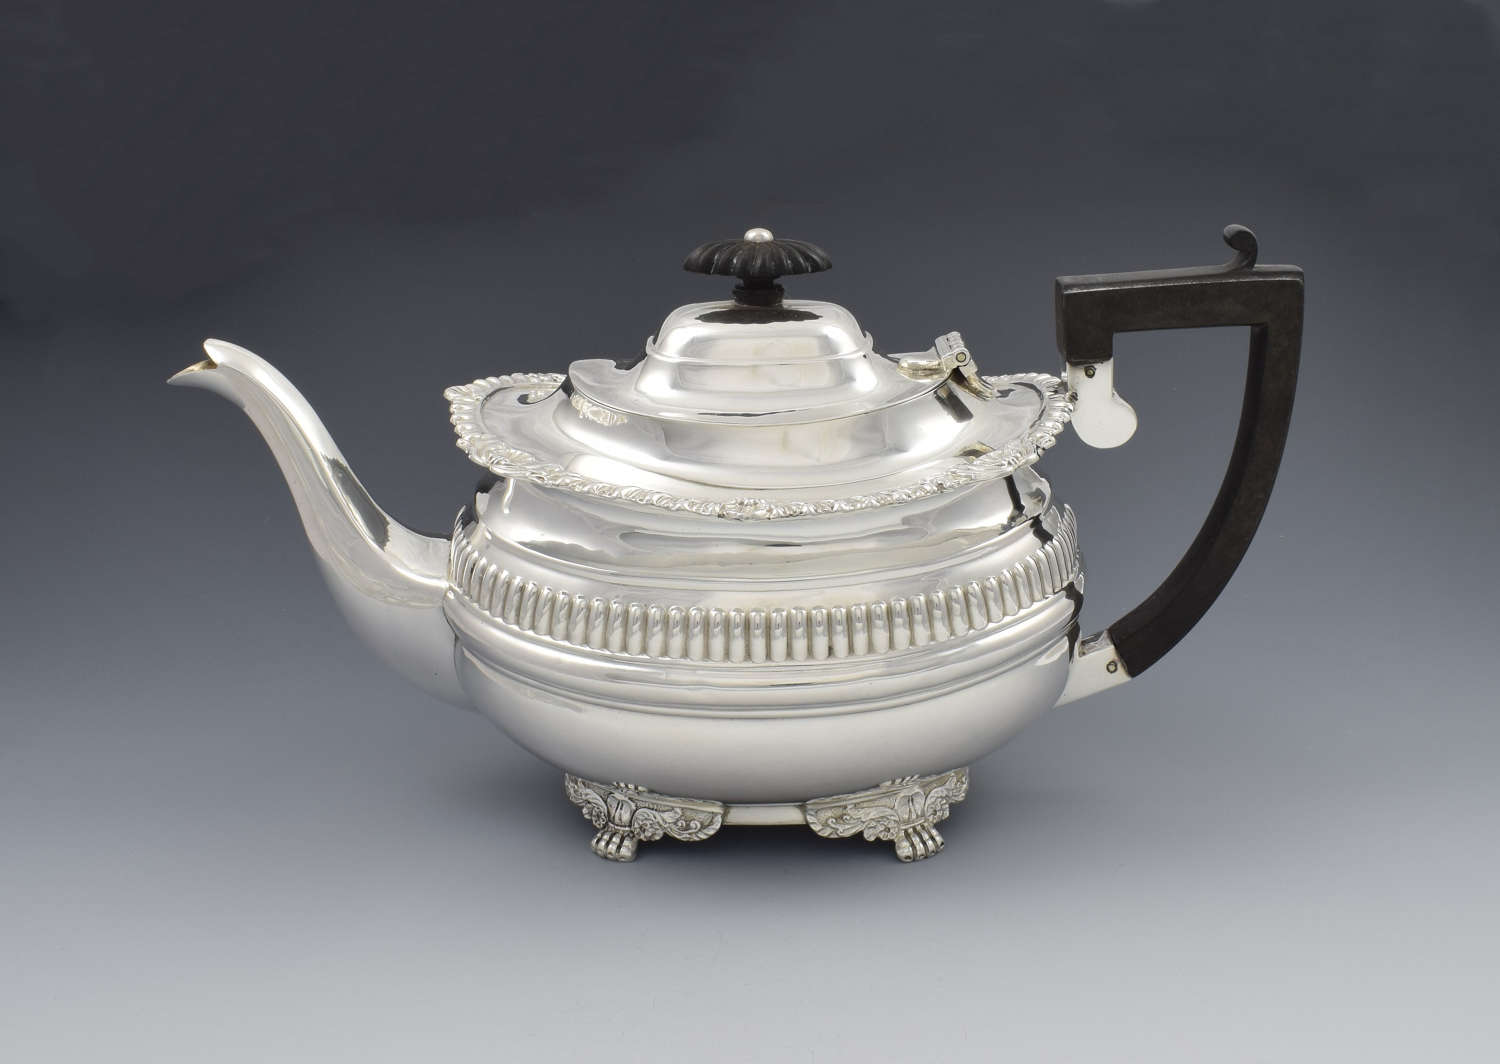 Edwardian Silver Teapot Chester 1906 Nathan & Hayes